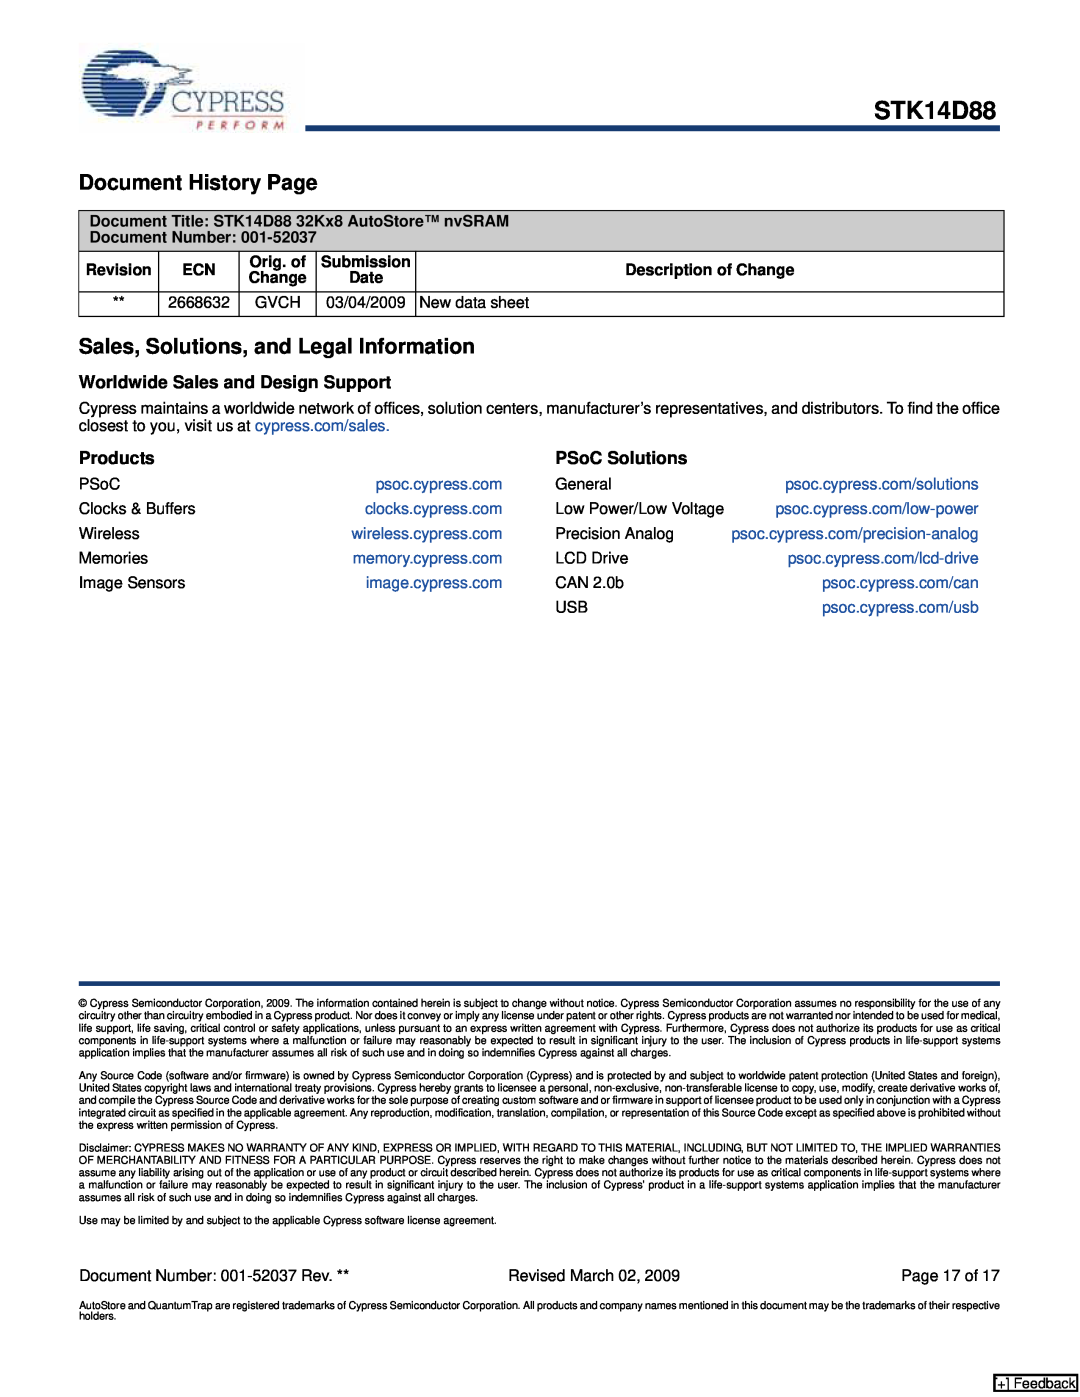 Cypress STK14D88 manual Document History Page, Sales, Solutions, and Legal Information, Worldwide Sales and Design Support 